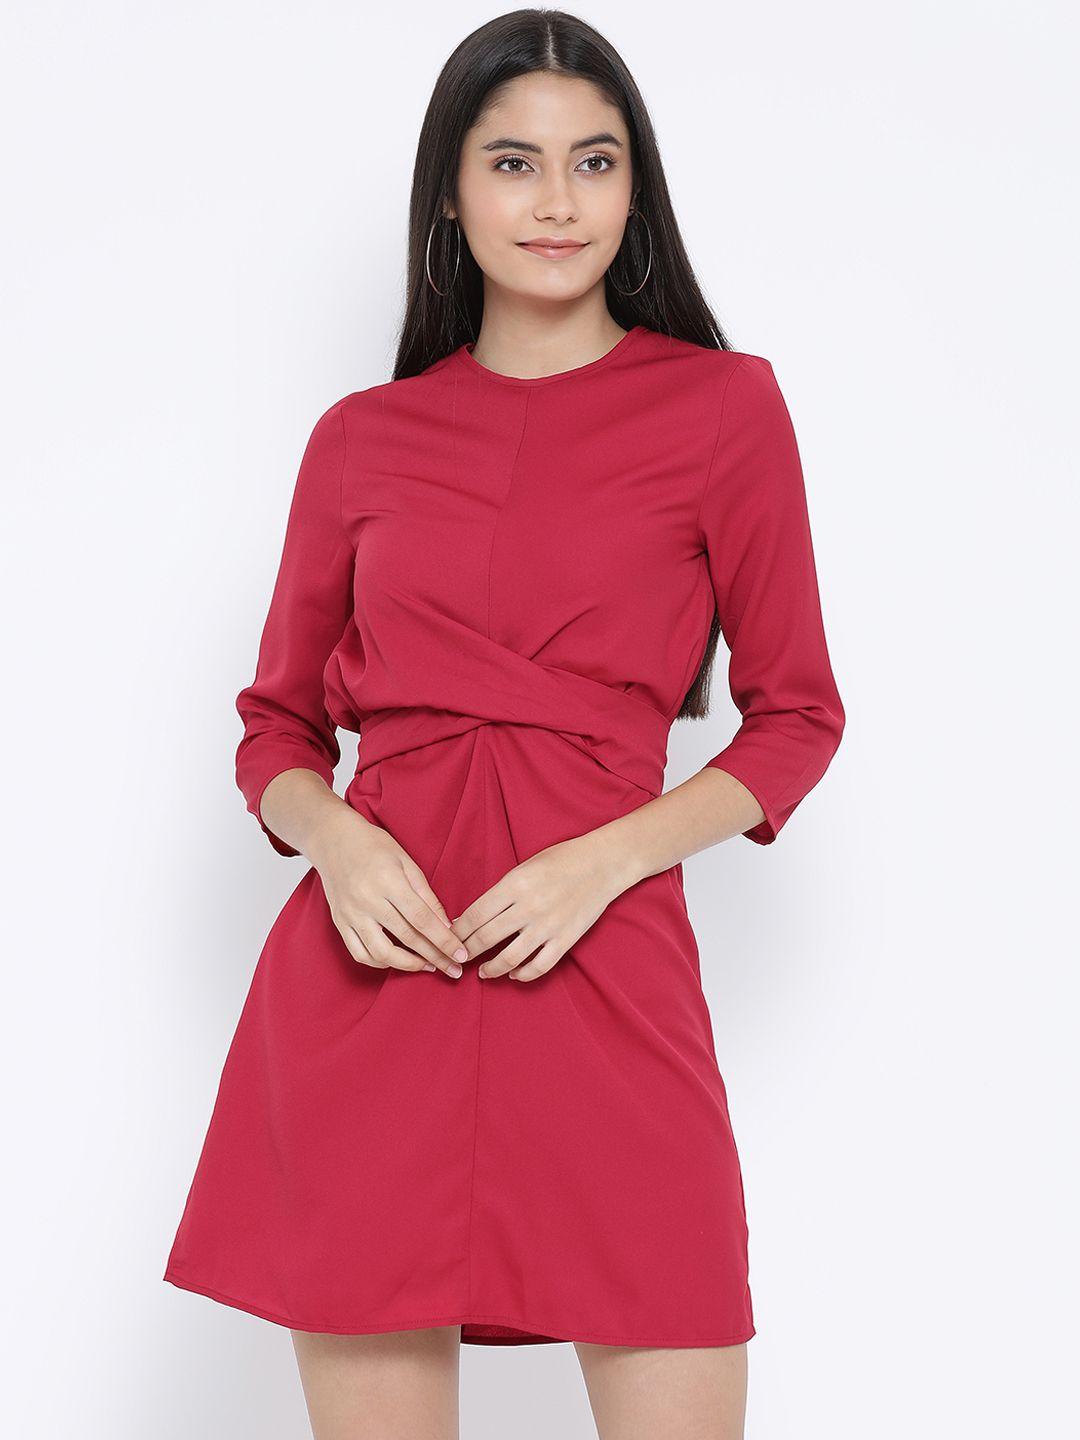 oxolloxo women red fit and flare dress